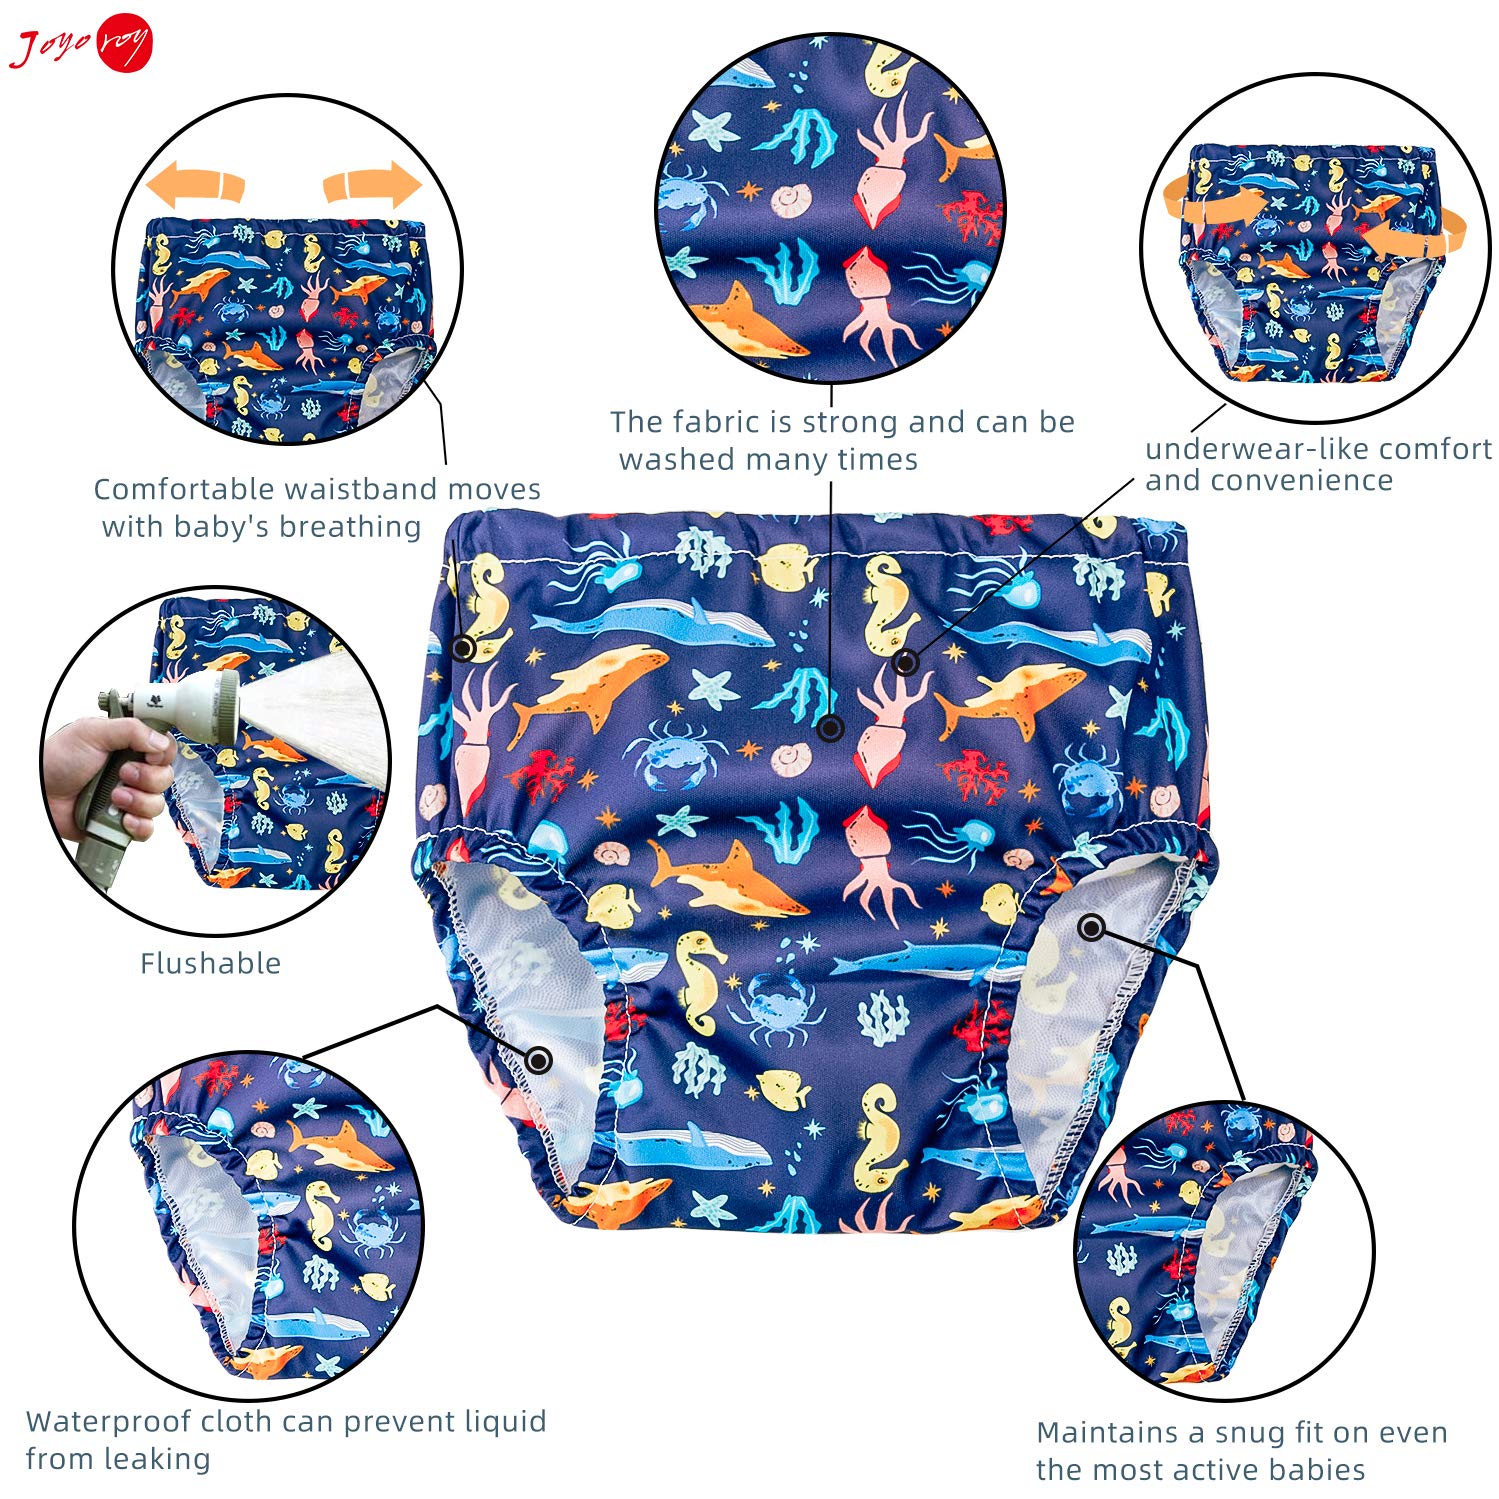 Plastic Training Pants Plastic Diaper Covers Toddler Plastic Underwear for  Toddlers Rubber Pants for Toddlers Rubber Training Pants for Toddlers  Plastic Underwear Cover Clothing Covers Plastic 4t 